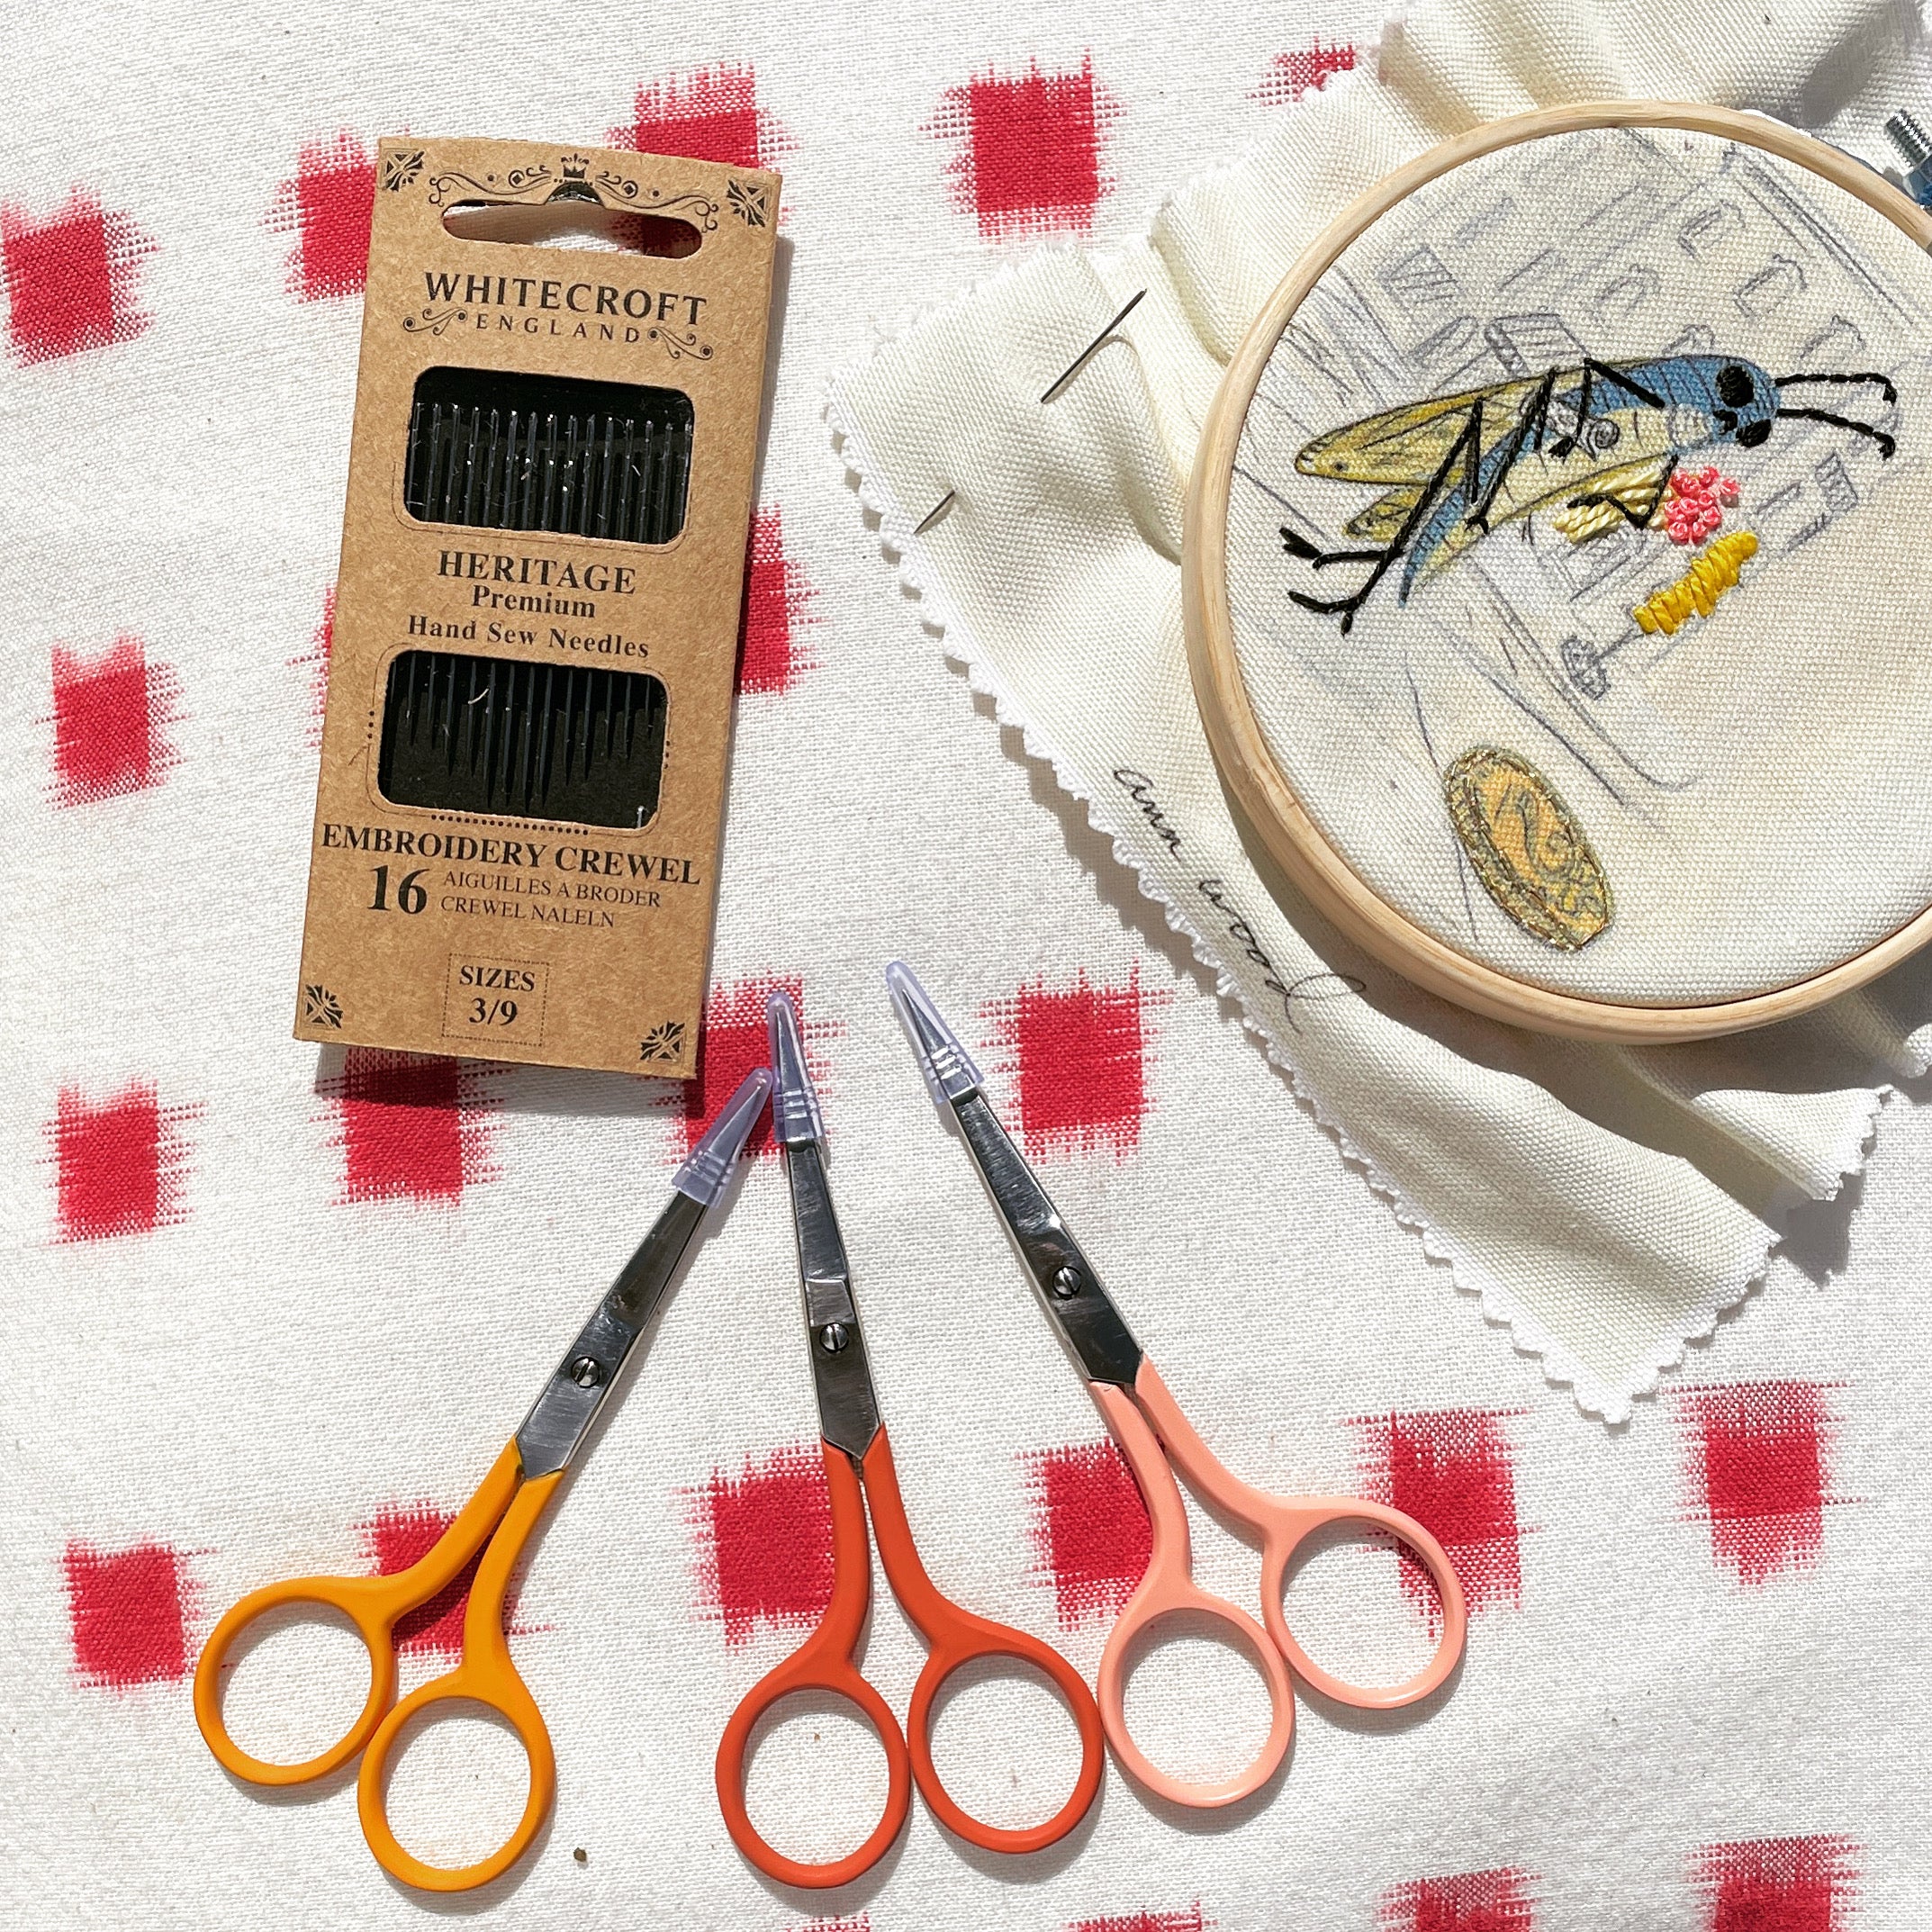 Embroidery scissors and needles